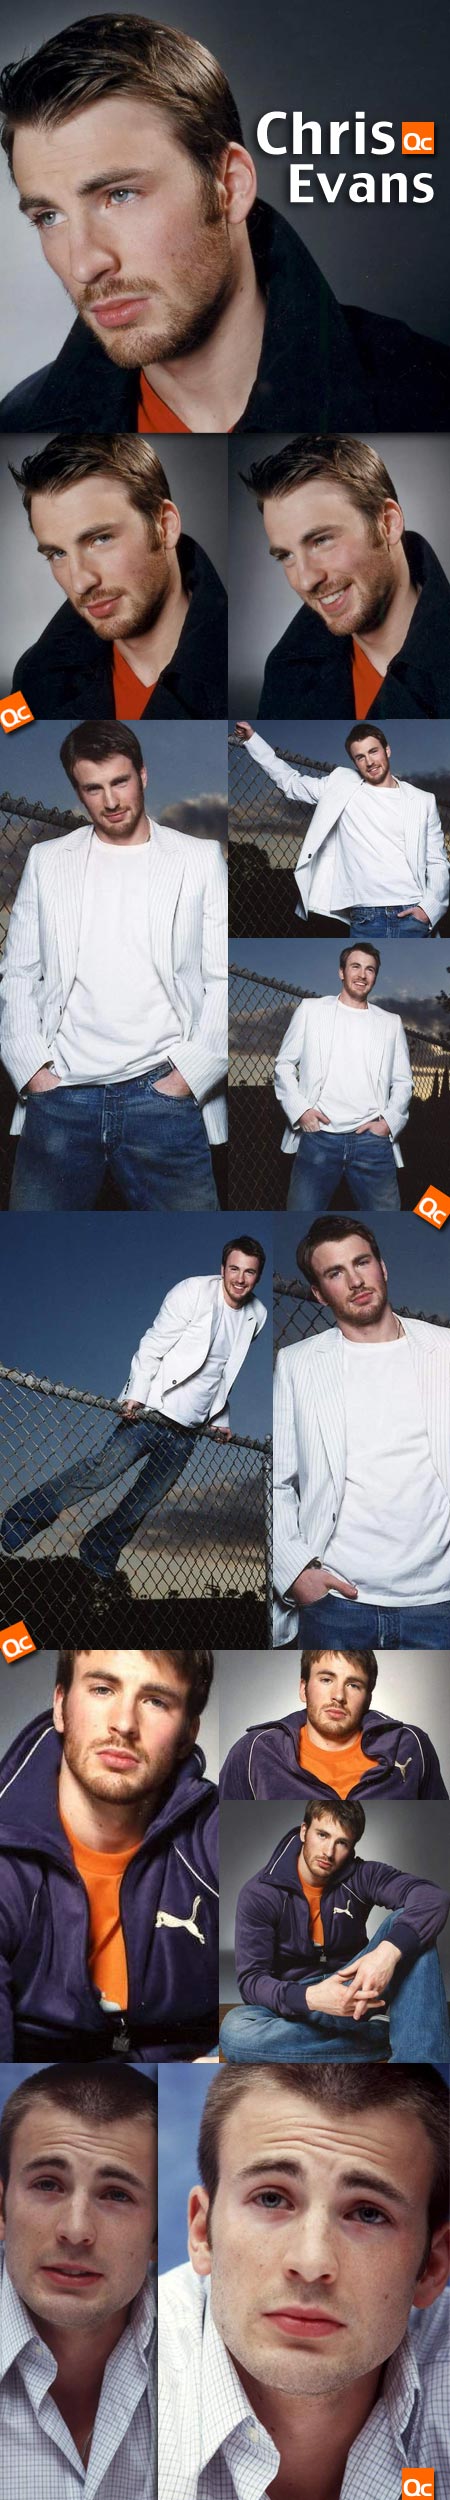 Queer Candy - Chris Evans